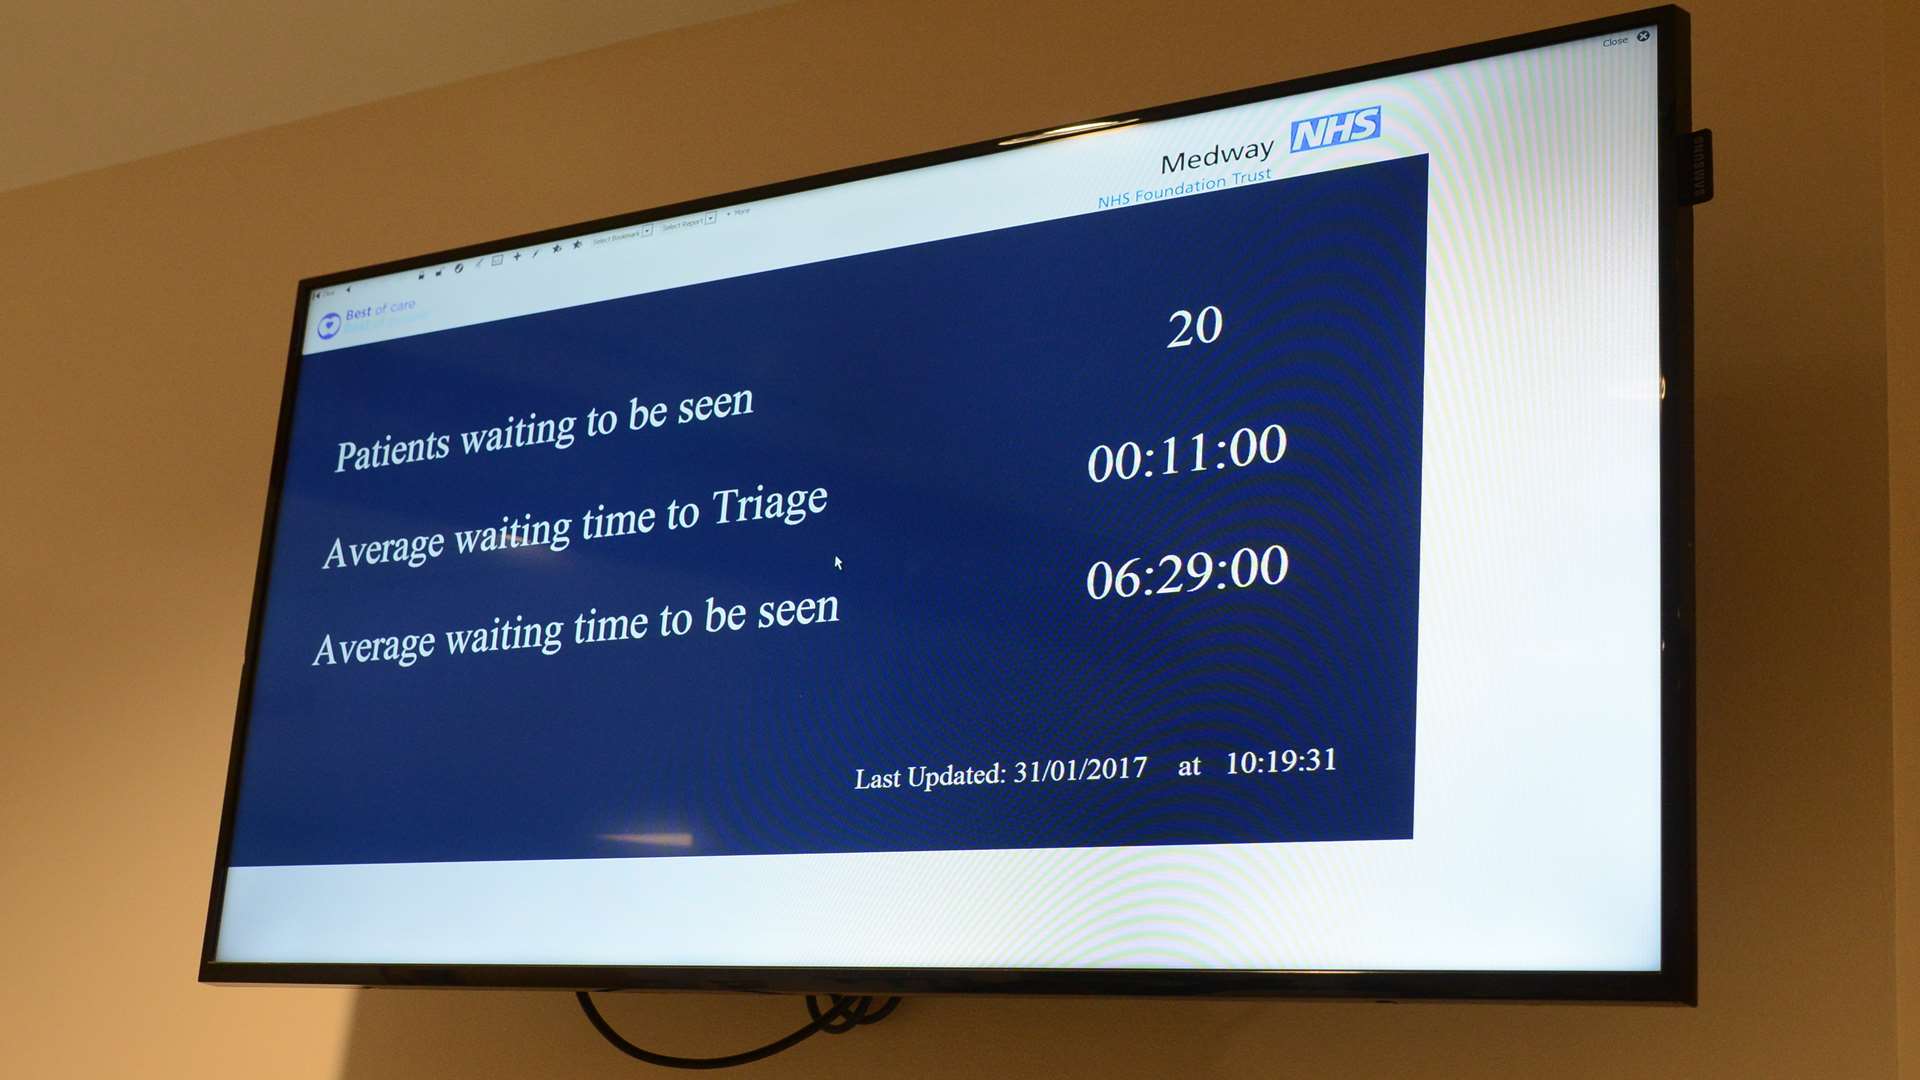 The waiting times monitor in the A&E reception area in Medway